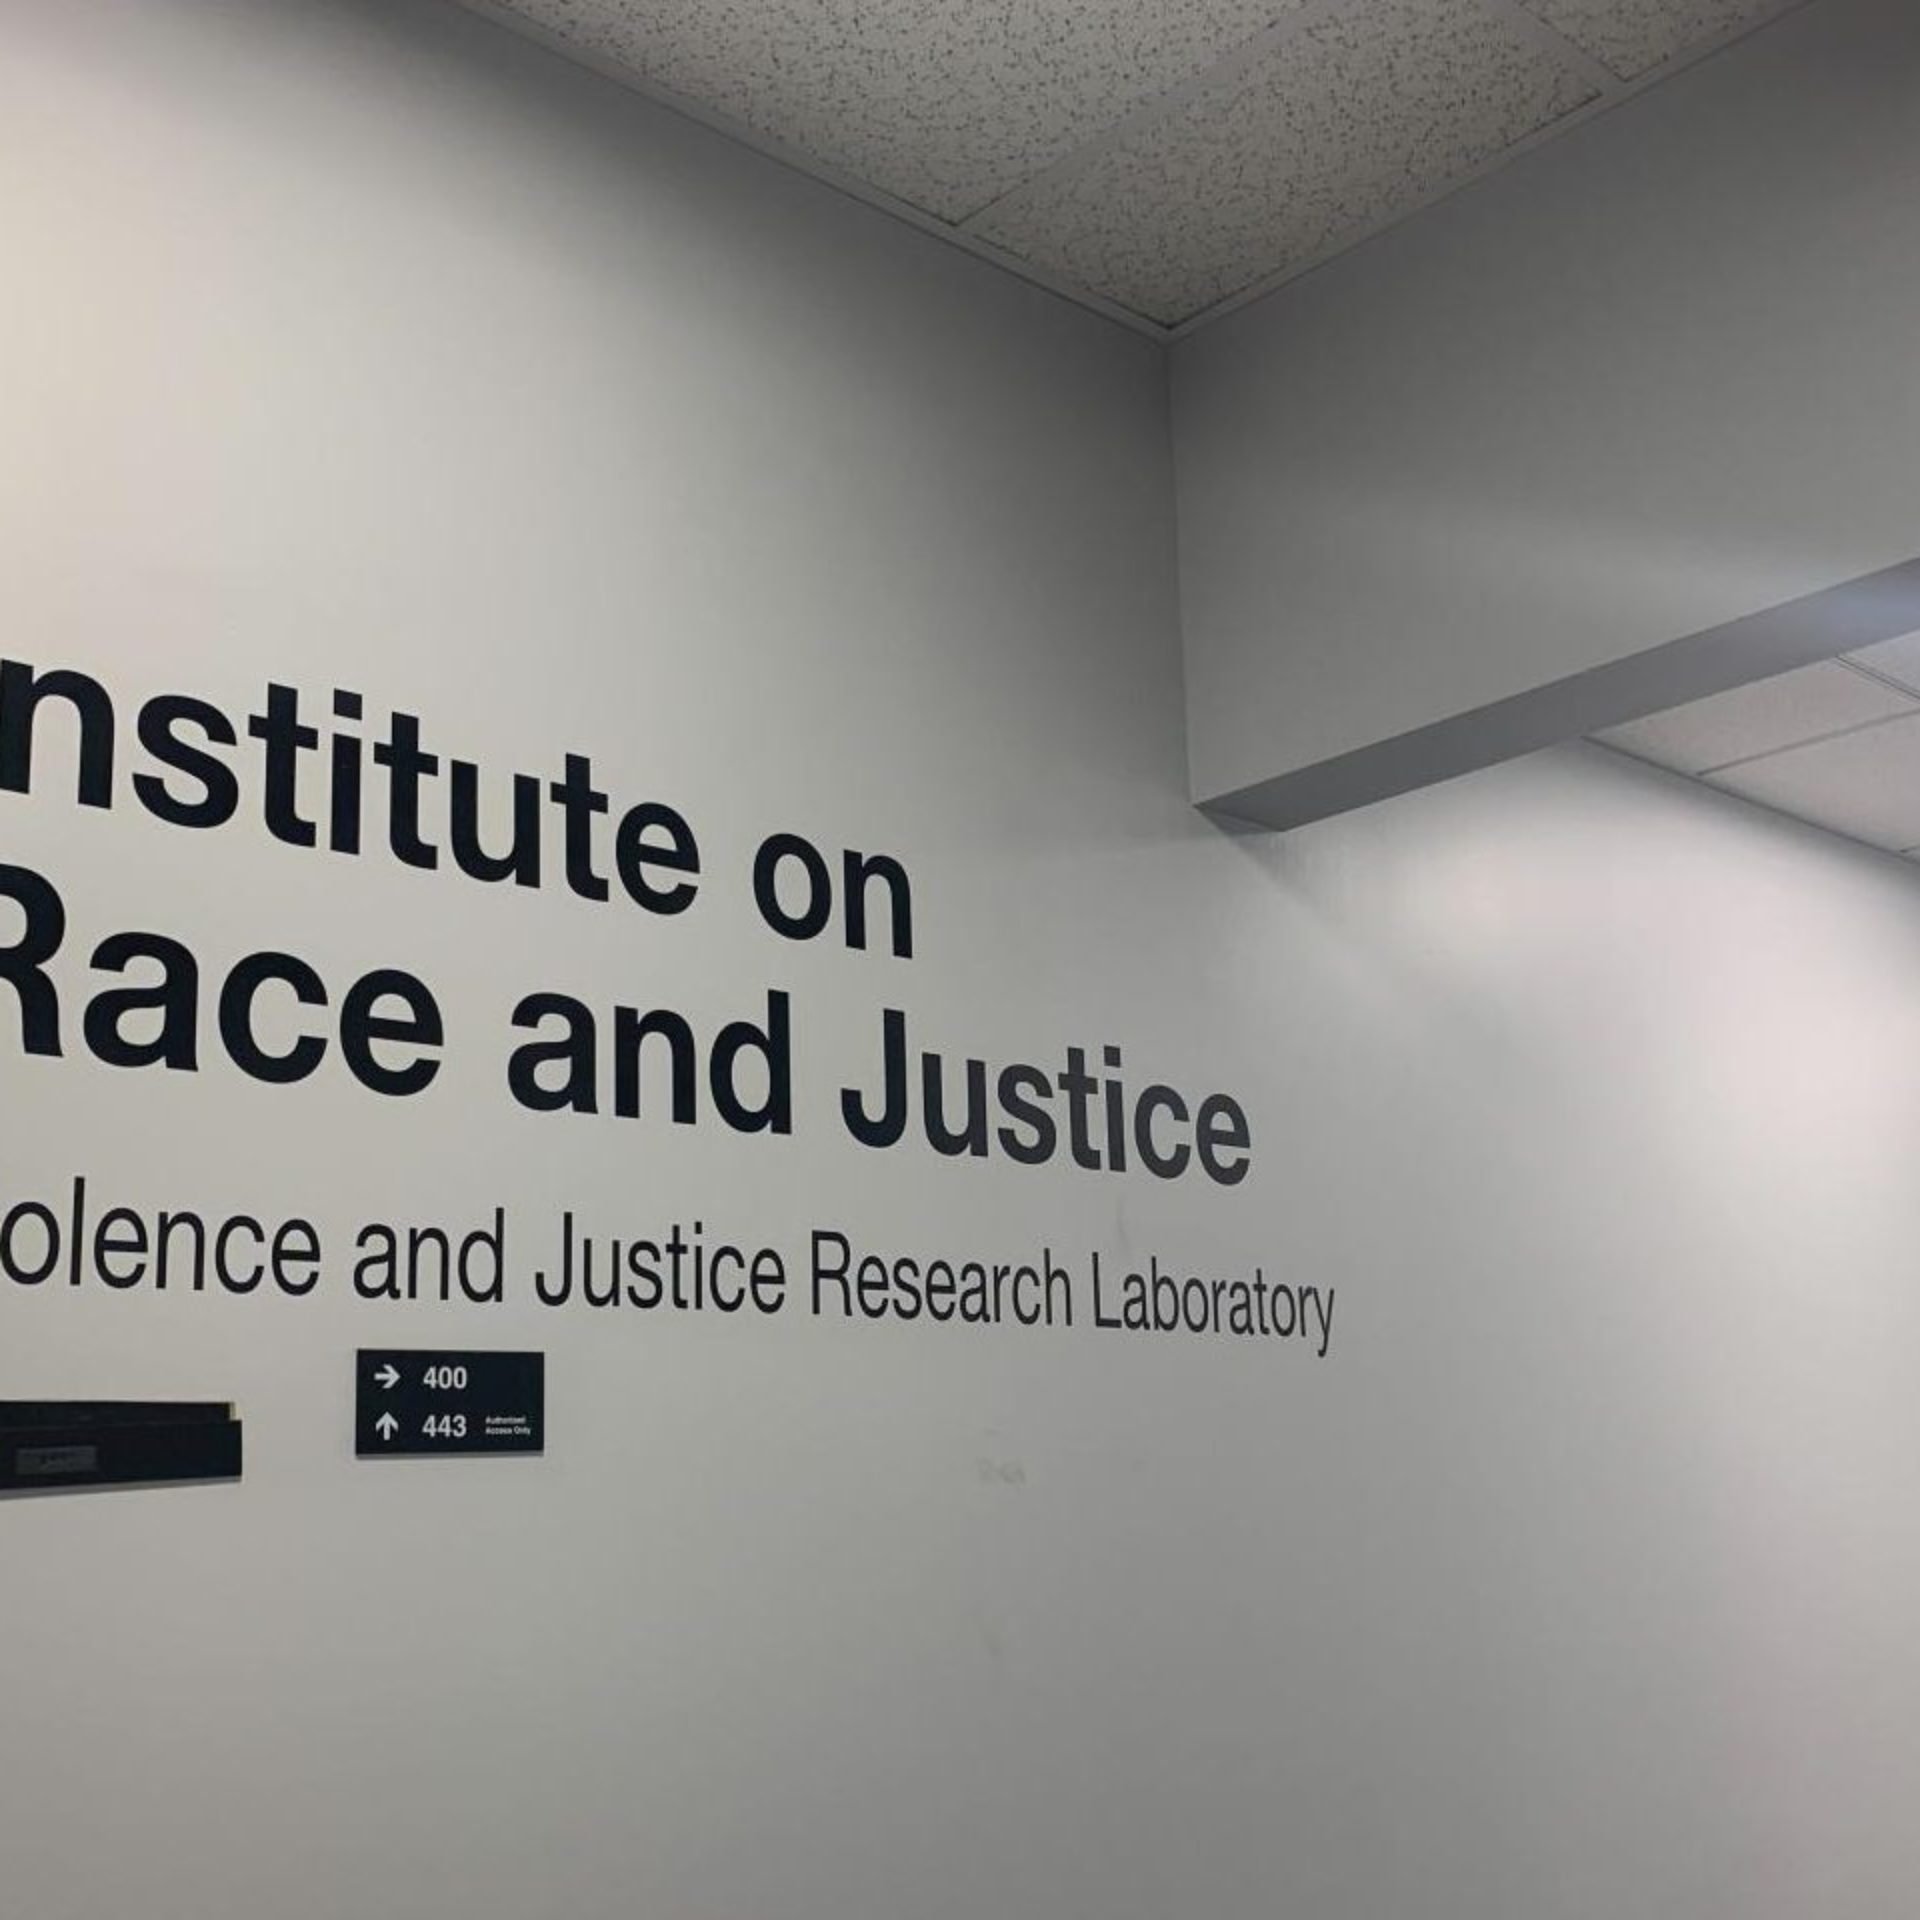 Northeastern’s Institute on Race and Justice helps open dialogue ...